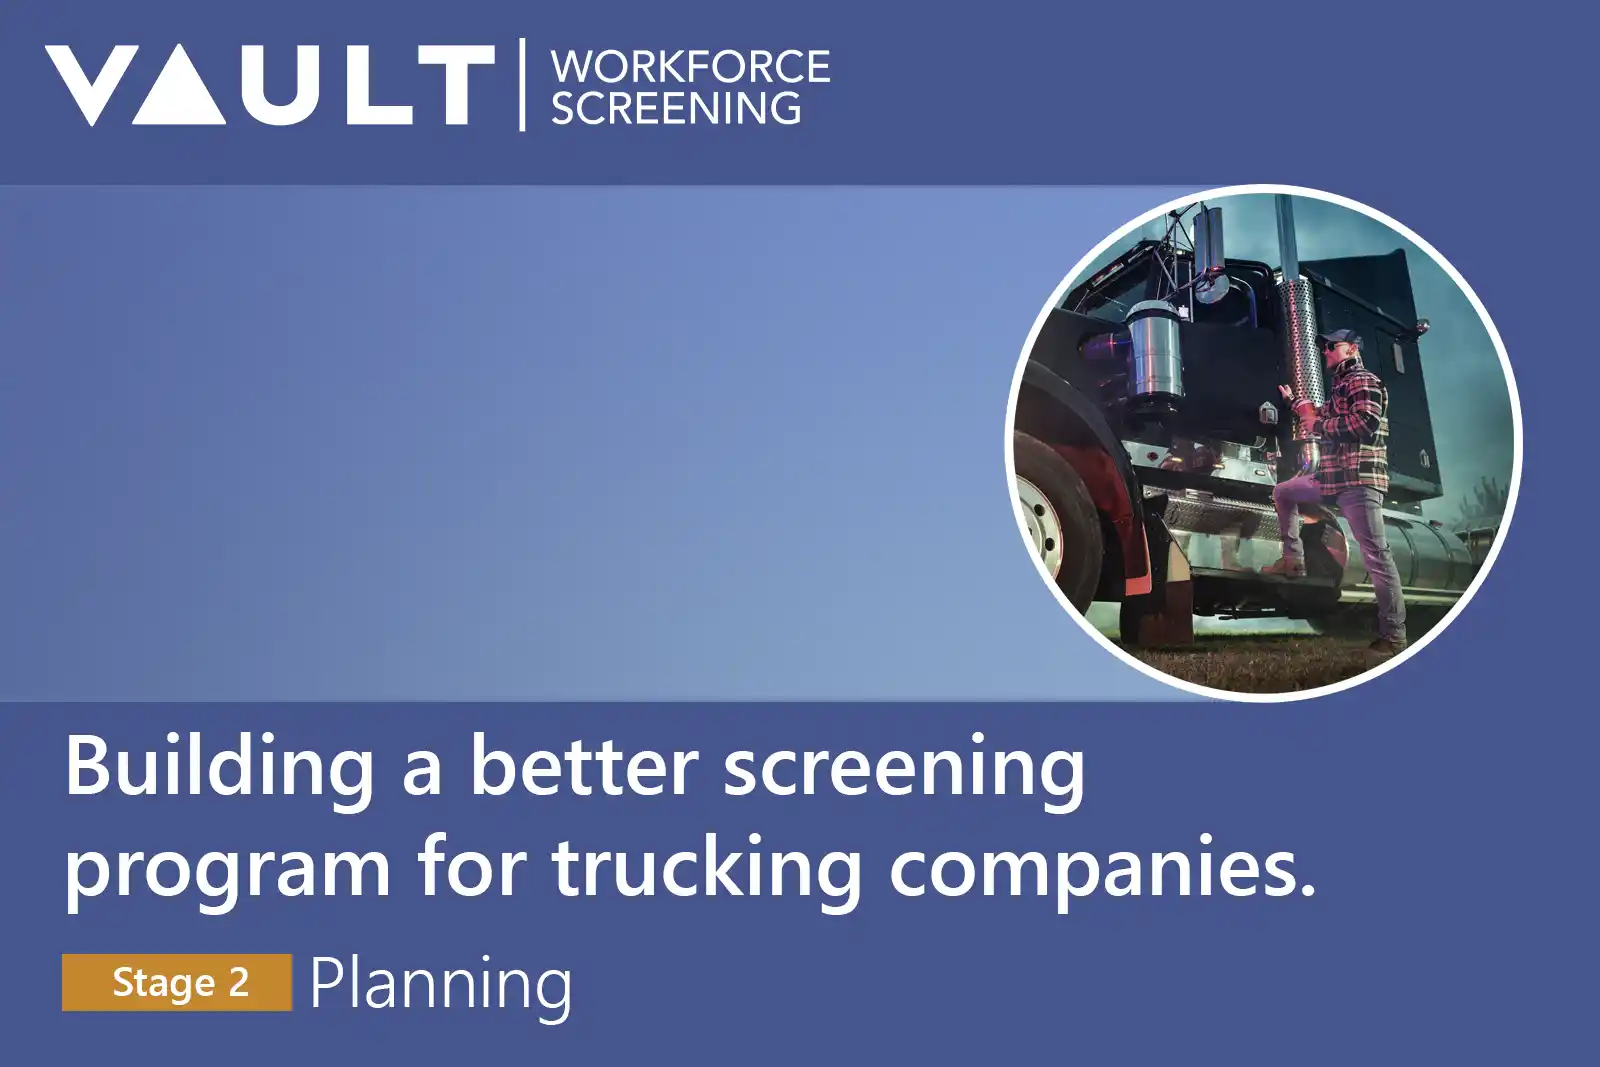 A better screening program for trucking companies. Stage 2: Planning